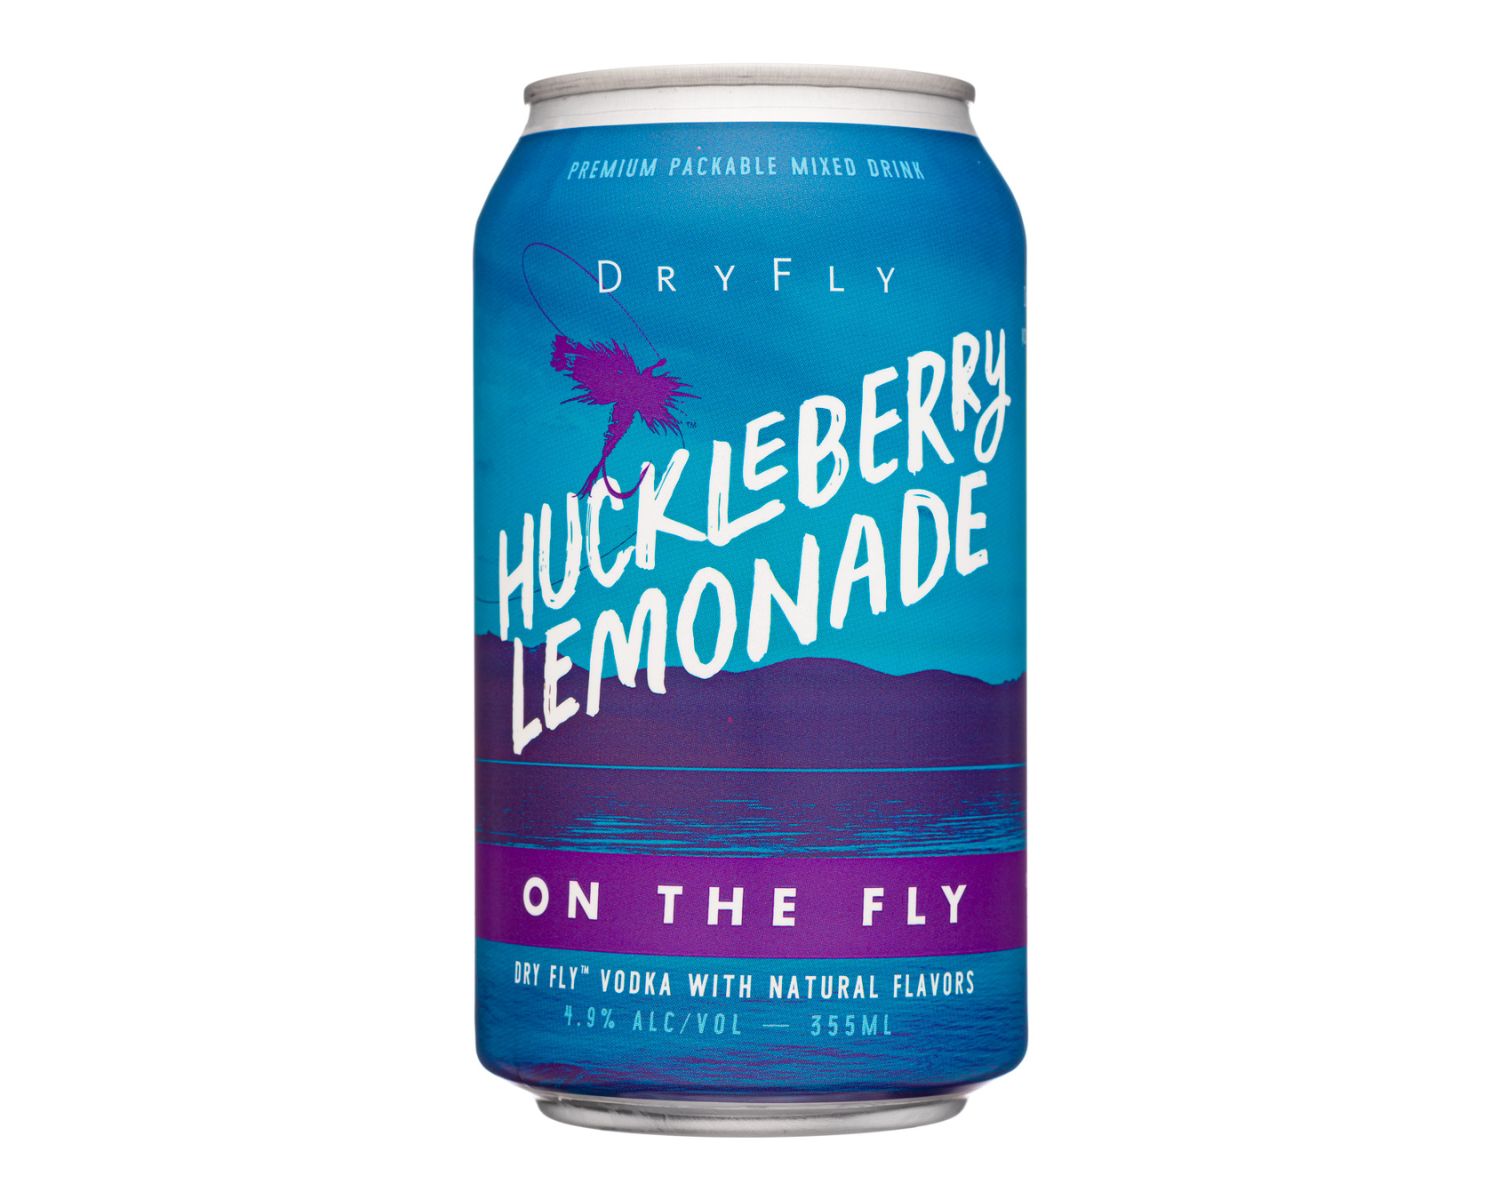 10-dry-fly-huckleberry-lemonade-nutrition-facts